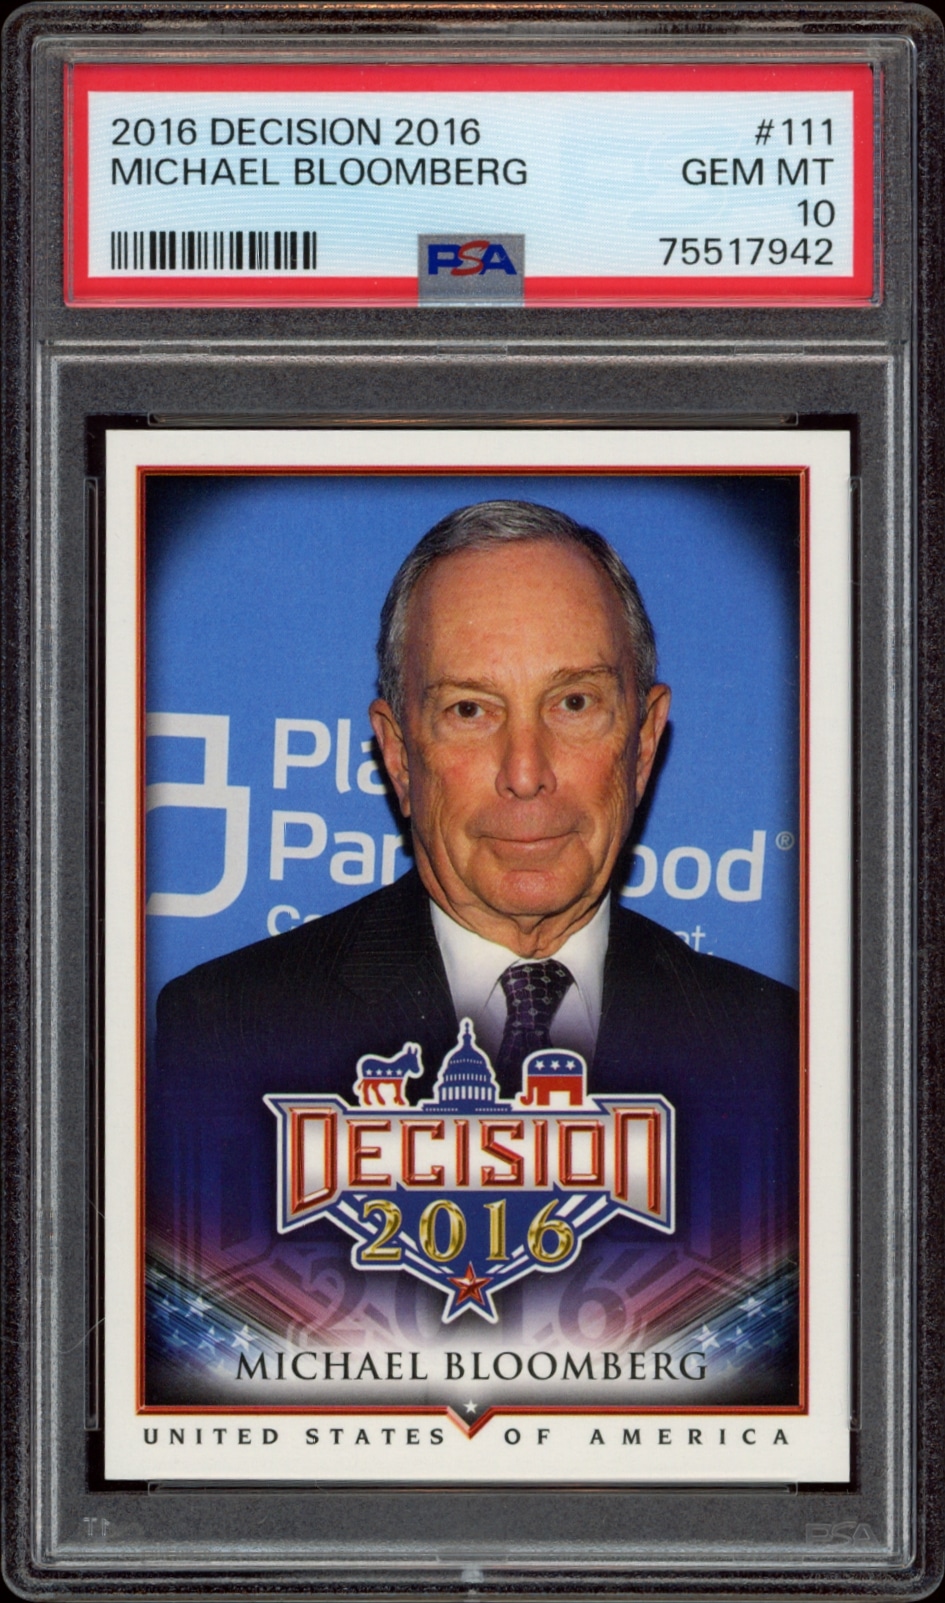 2016 Leaf Decision trading card featuring Michael Bloomberg, rated PSA 10.